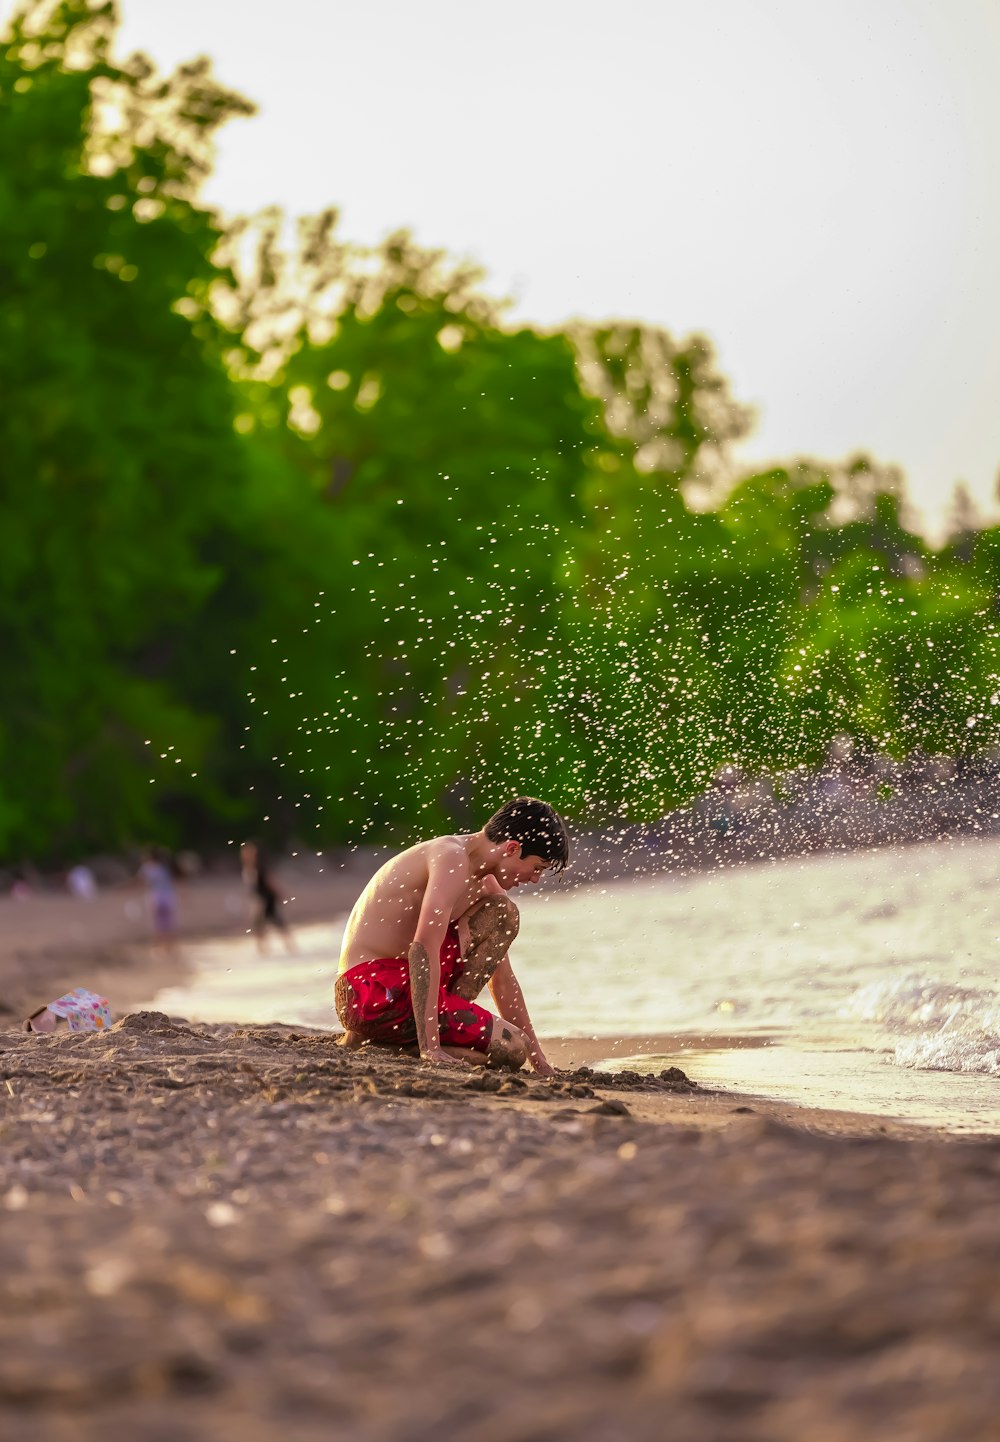 a boy playing in the water on a beach